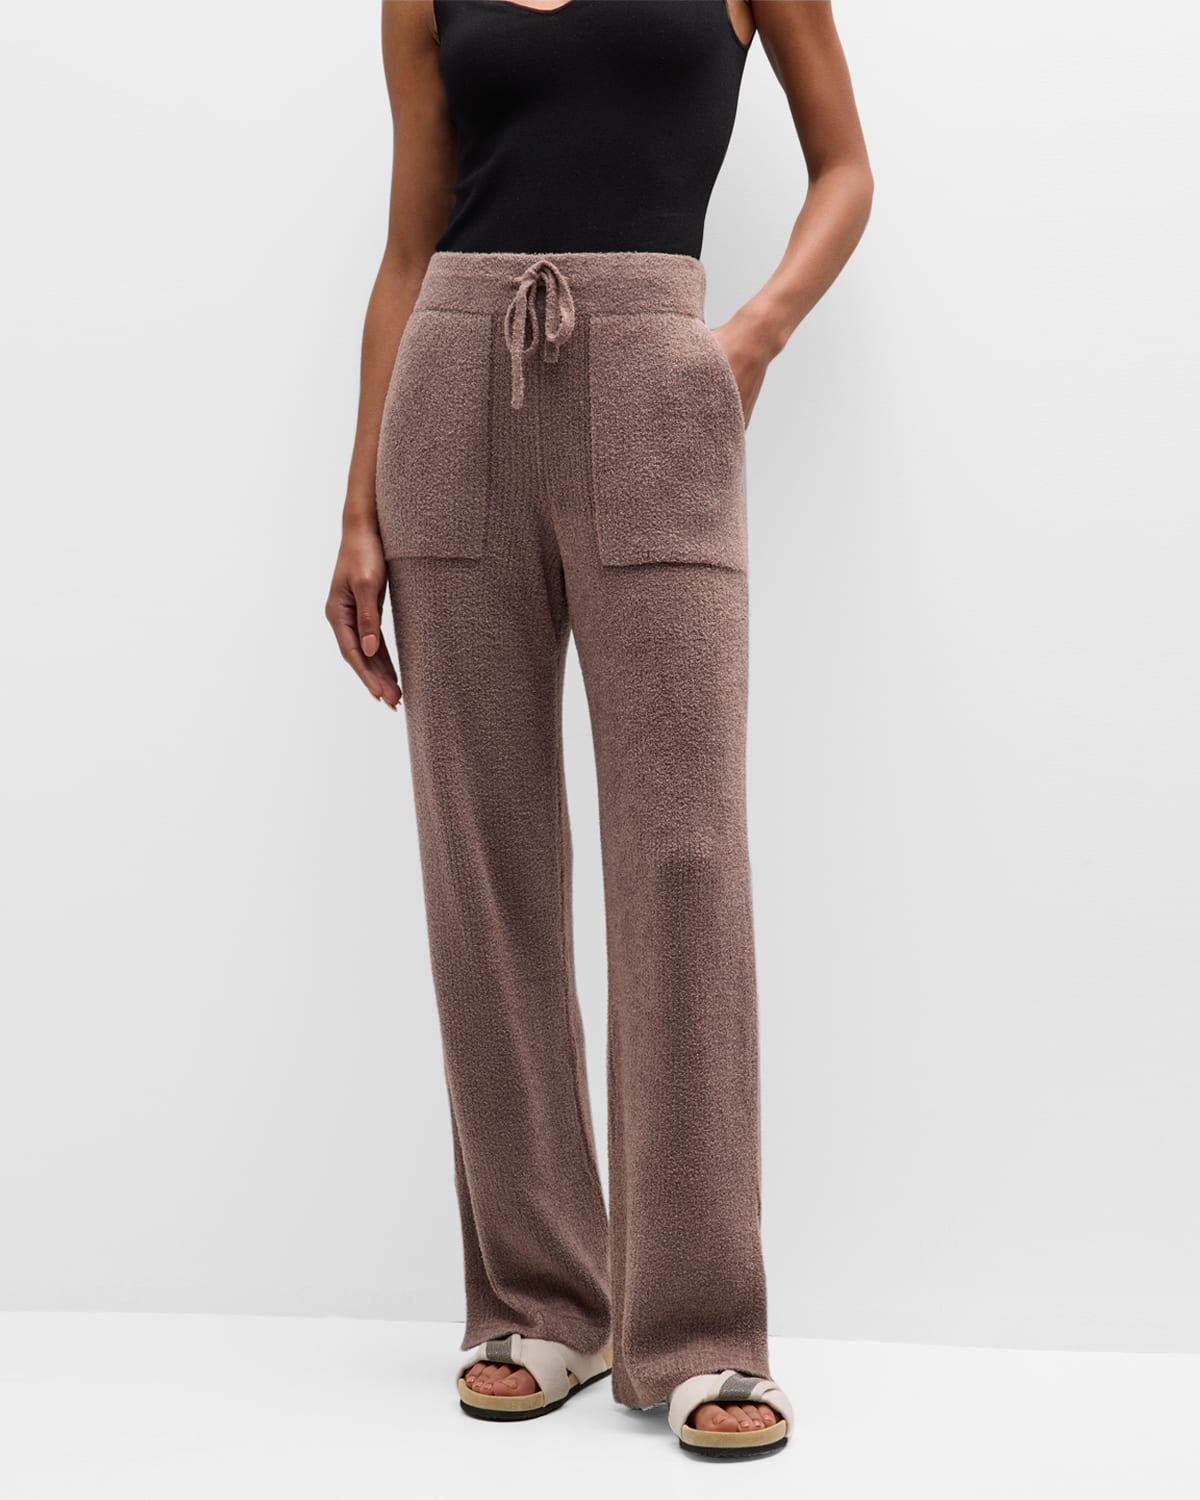 Barefoot Dreams Cozychic Lite Pinched Seam Slit Pants In Driftwood